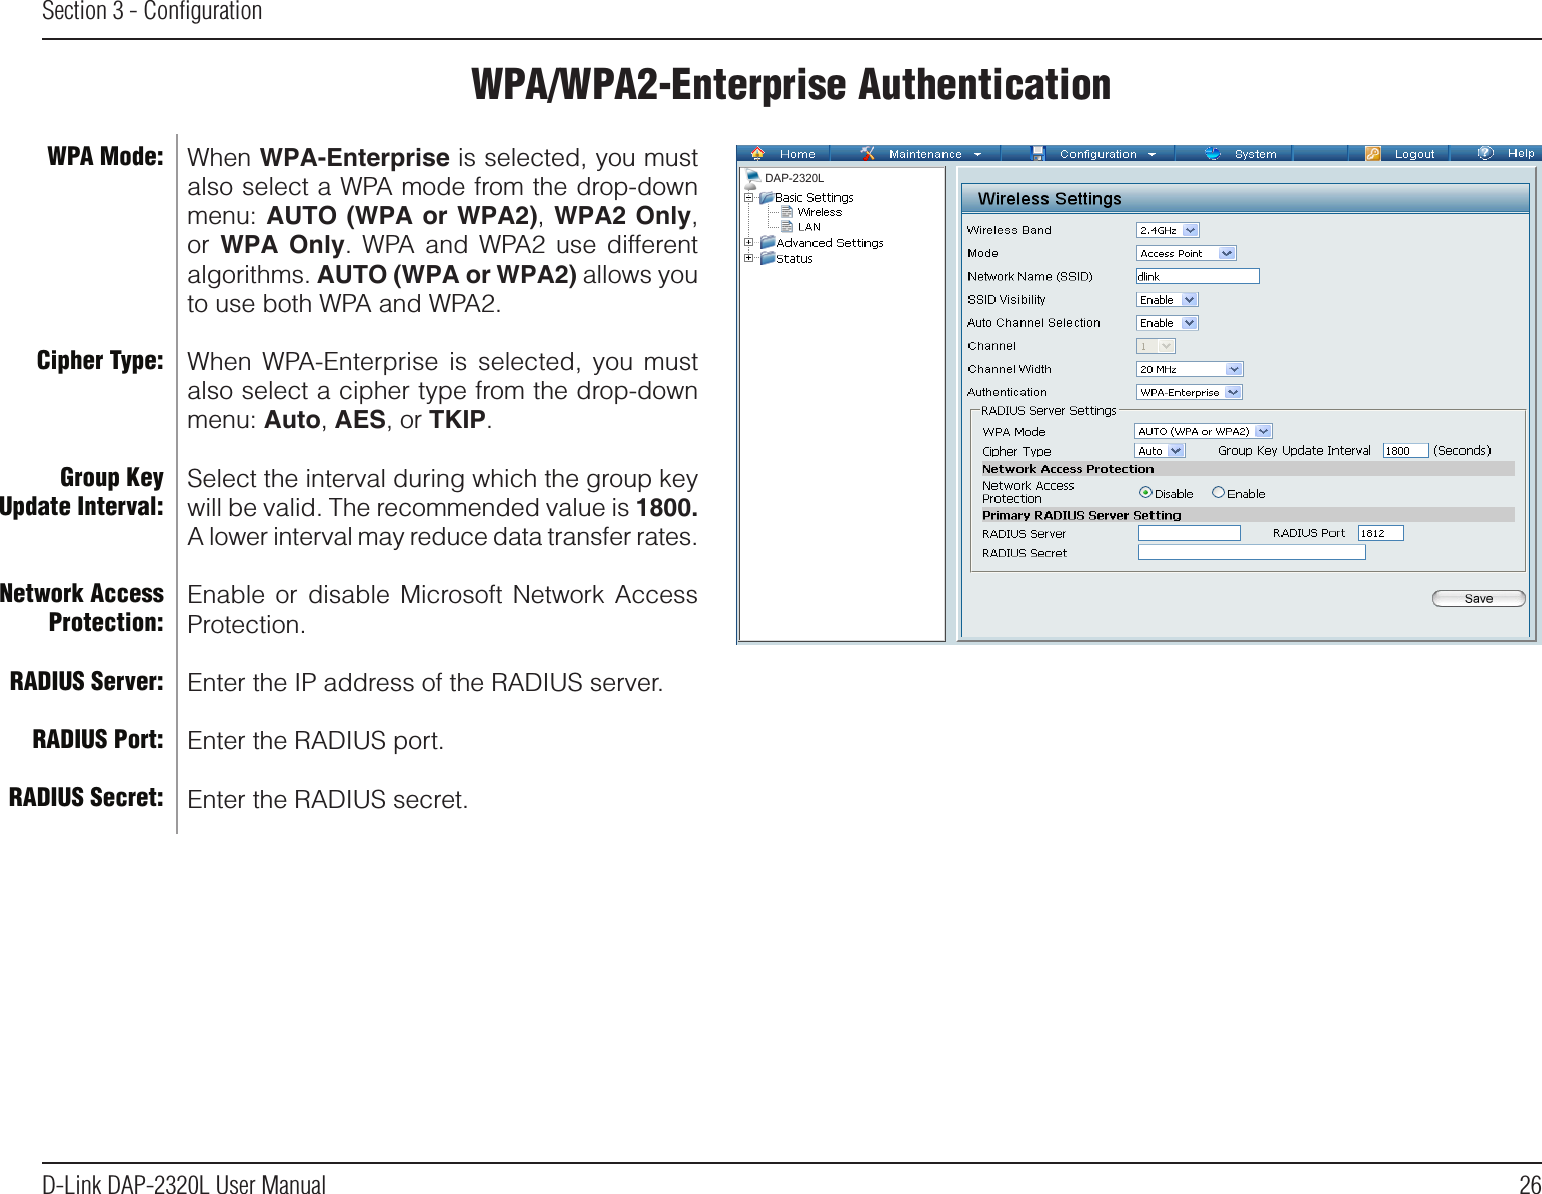 26D-Link DAP-2320L User ManualSection 3 - ConﬁgurationWPA/WPA2-Enterprise AuthenticationWhen WPA-Enterprise is selected, you must also select a WPA mode from the drop-down menu: AUTO (WPA or WPA2), WPA2 Only, or  WPA  Only.  WPA  and  WPA2  use  different algorithms. AUTO (WPA or WPA2) allows you to use both WPA and WPA2. When  WPA-Enterprise  is  selected,  you  must also select a cipher type from the drop-down menu: Auto, AES, or TKIP.Select the interval during which the group key will be valid. The recommended value is 1800. A lower interval may reduce data transfer rates.Enable  or  disable  Microsoft Network  Access Protection.Enter the IP address of the RADIUS server.Enter the RADIUS port.Enter the RADIUS secret.WPA Mode: Cipher Type:Group Key Update Interval:Network Access Protection:RADIUS Server:RADIUS Port:RADIUS Secret:DAP-2320L